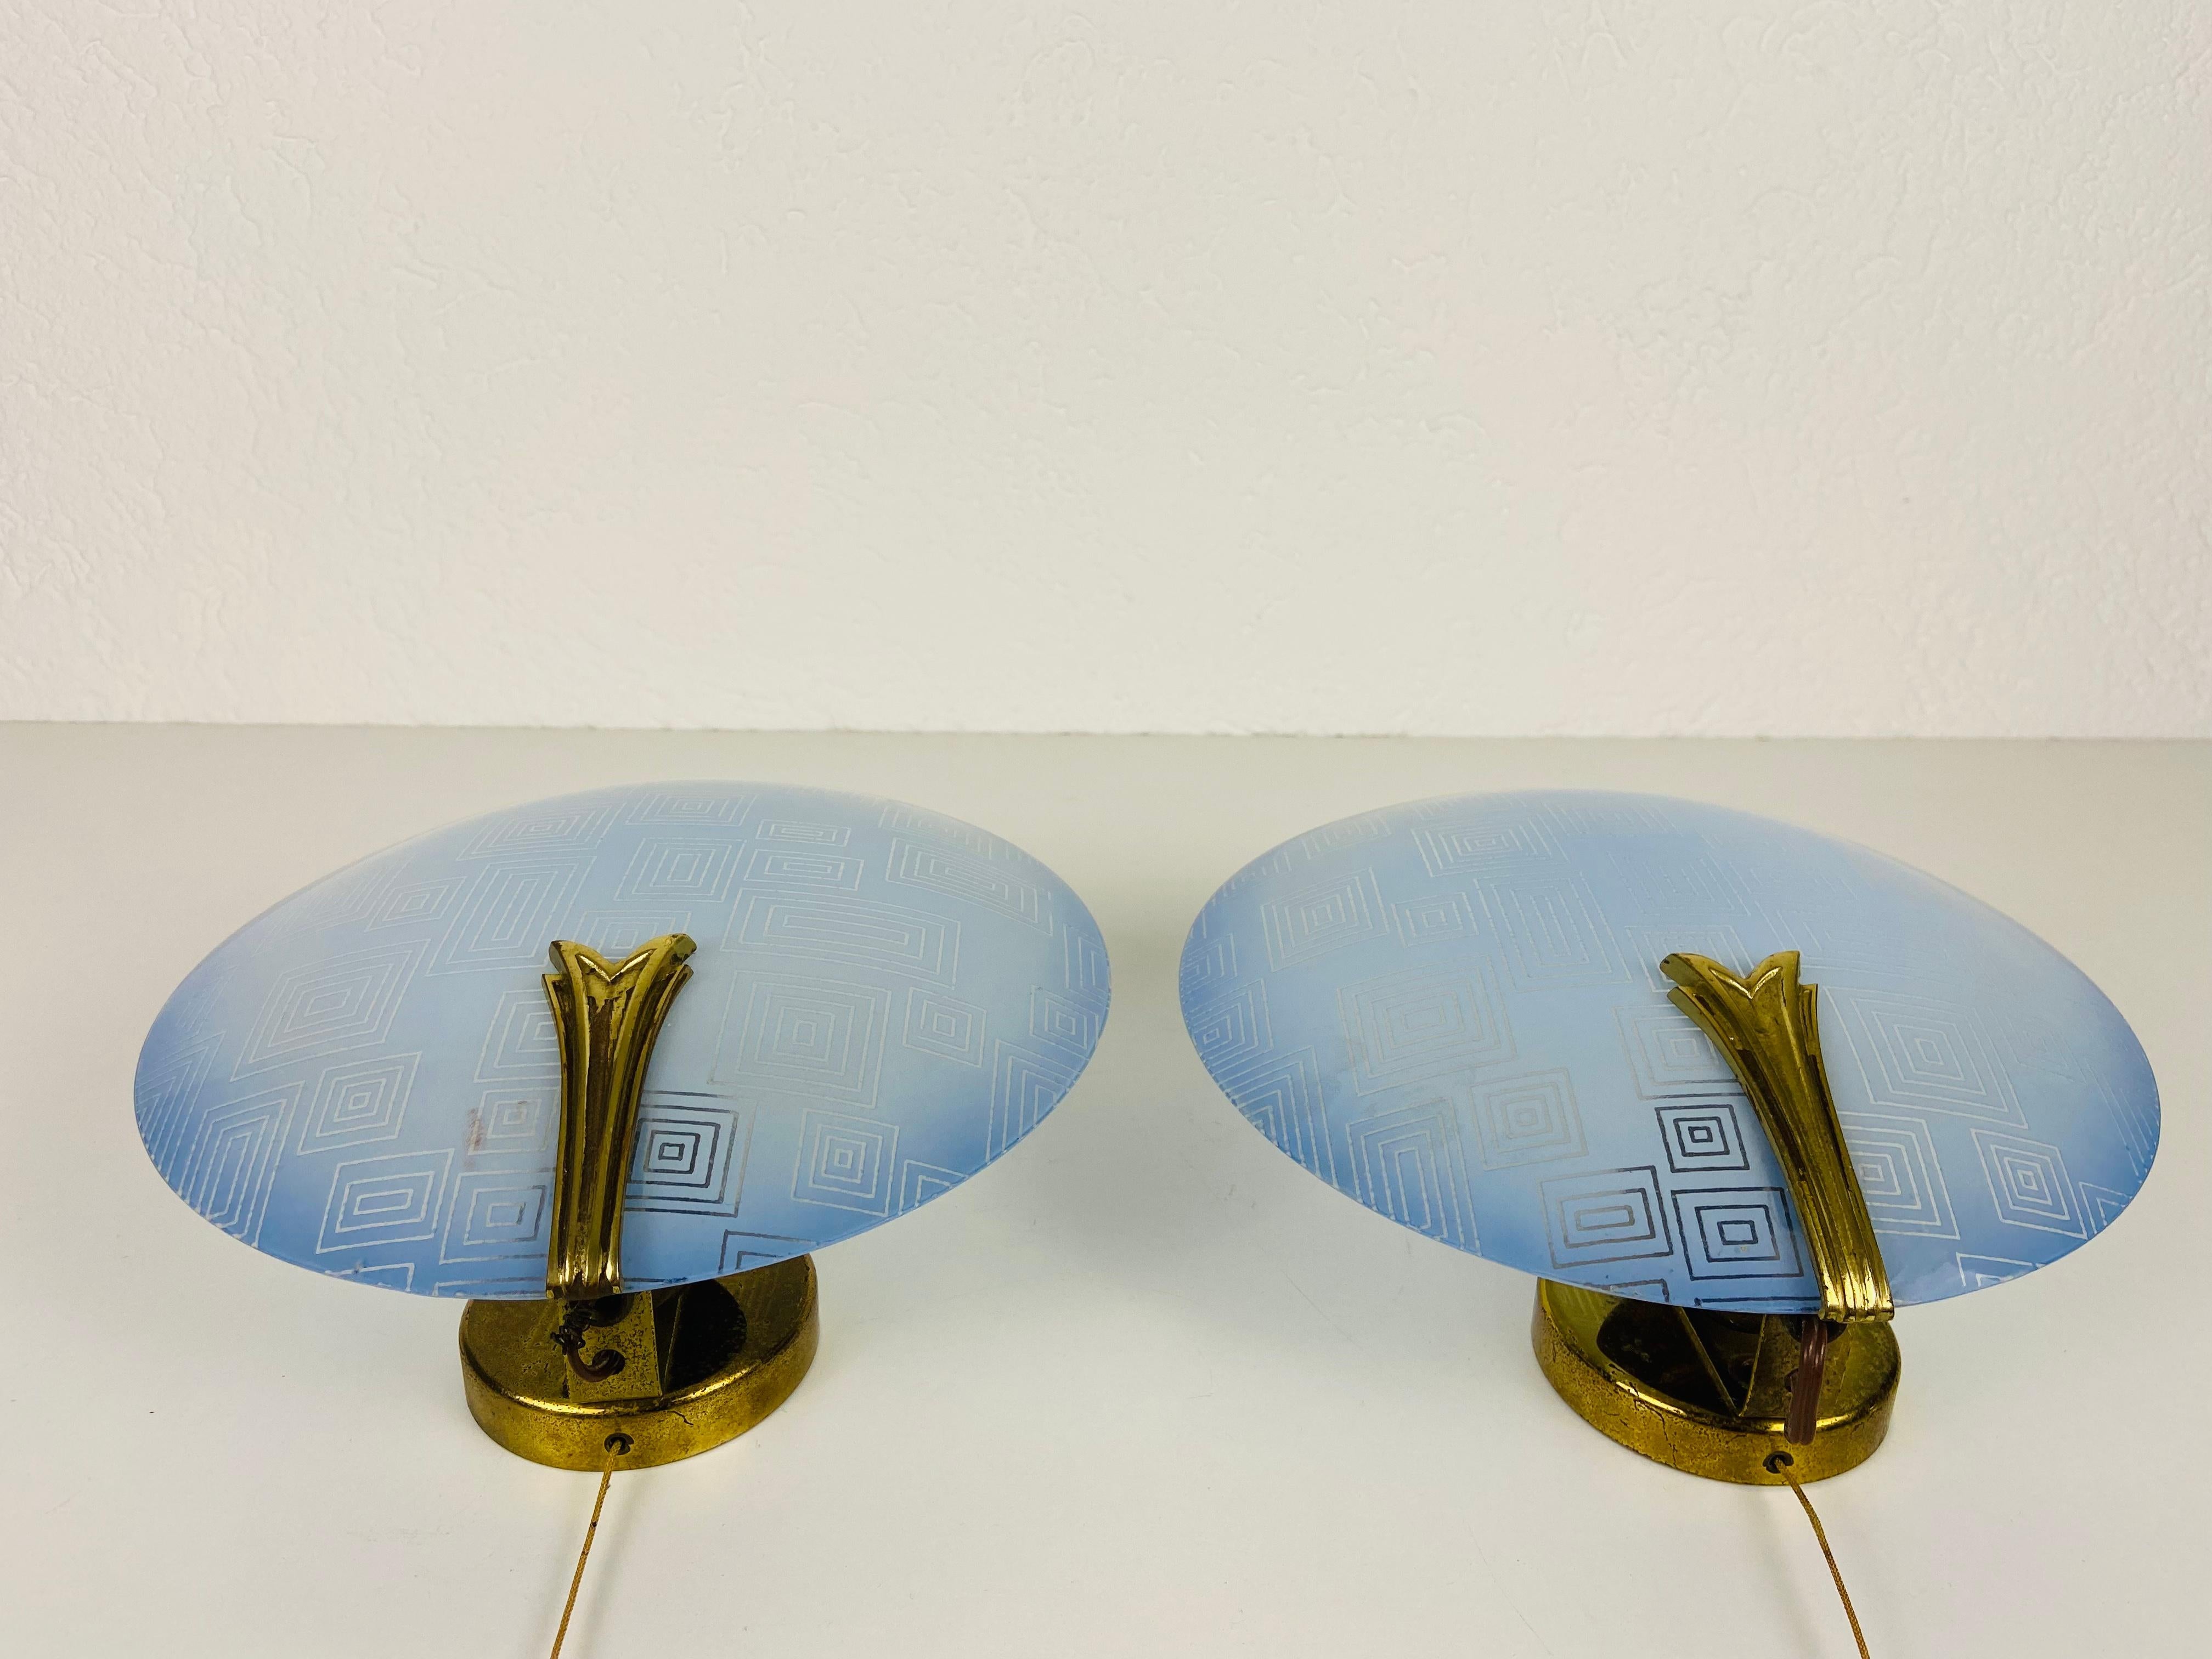 Brass and blue glass sconces made in Germany in the 1960s. The lamps are in a very good condition.

The lights require E14 light bulbs. Works with both 120/220V. 

Free worldwide shipping.